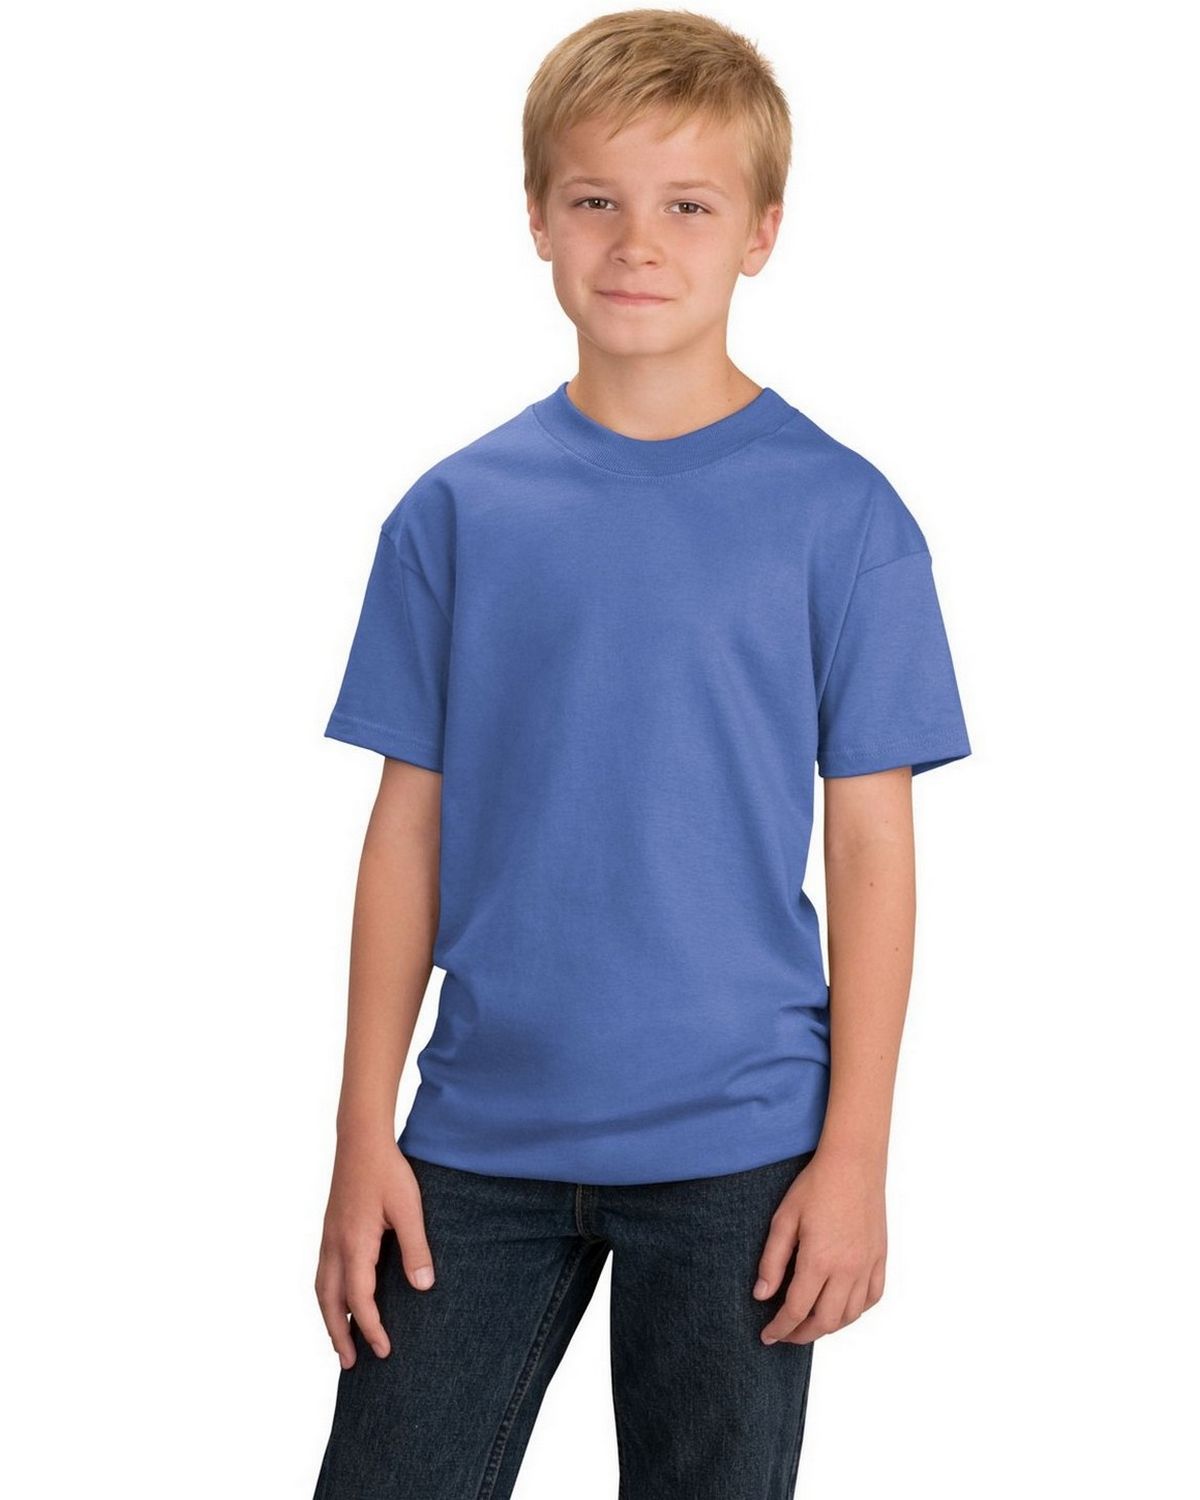 UPC 011919000852 product image for Port & Company PC61Y Youth Essential T-Shirt - Ultramarine Blue - S | upcitemdb.com